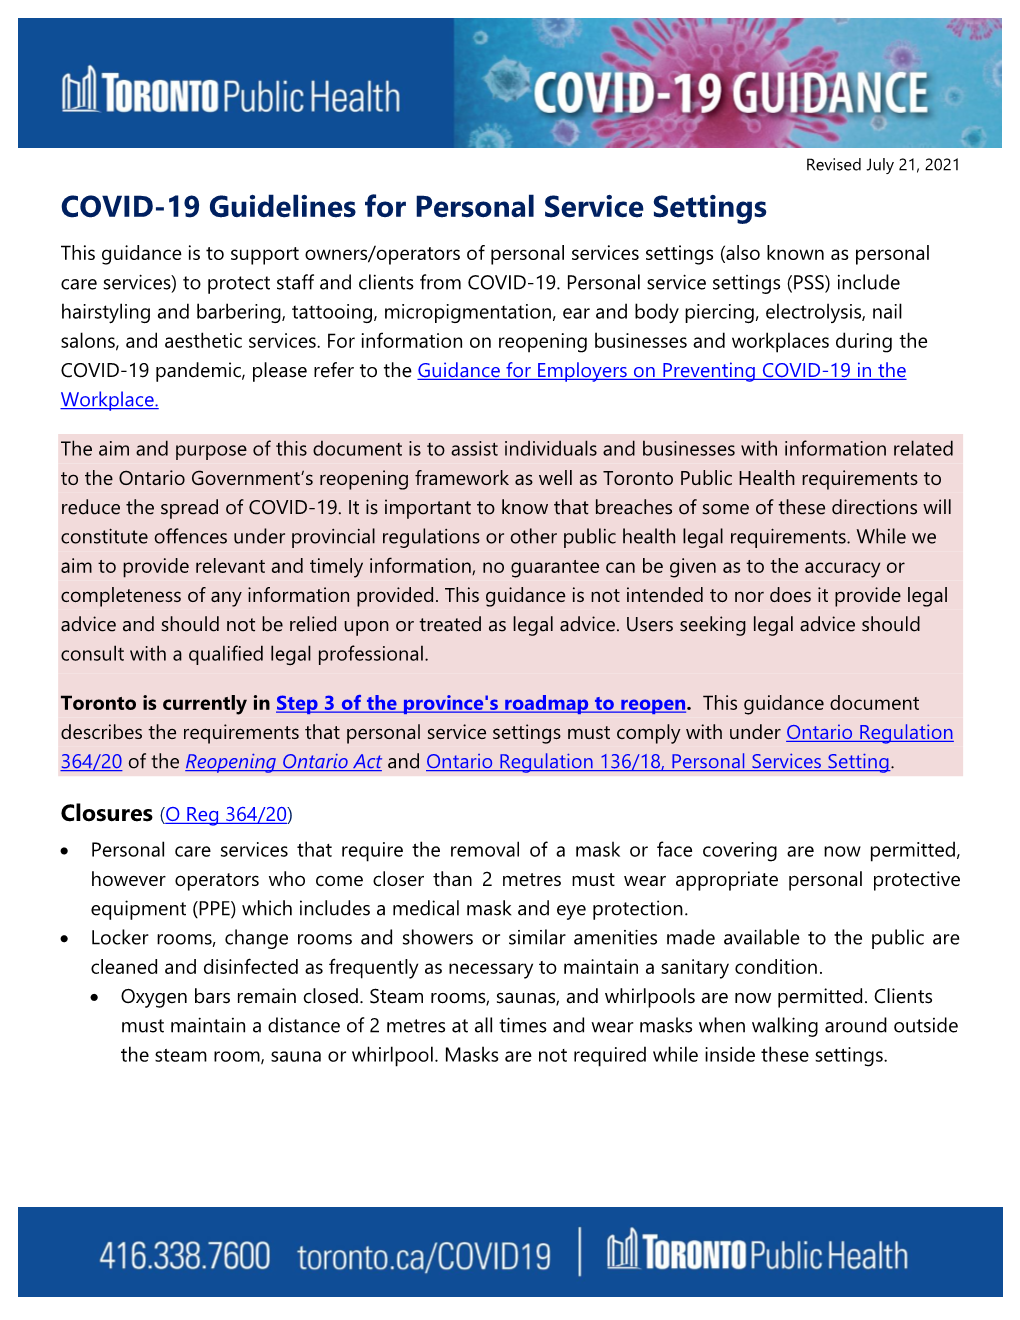 COVID-19 Guidelines for Personal Service Settings